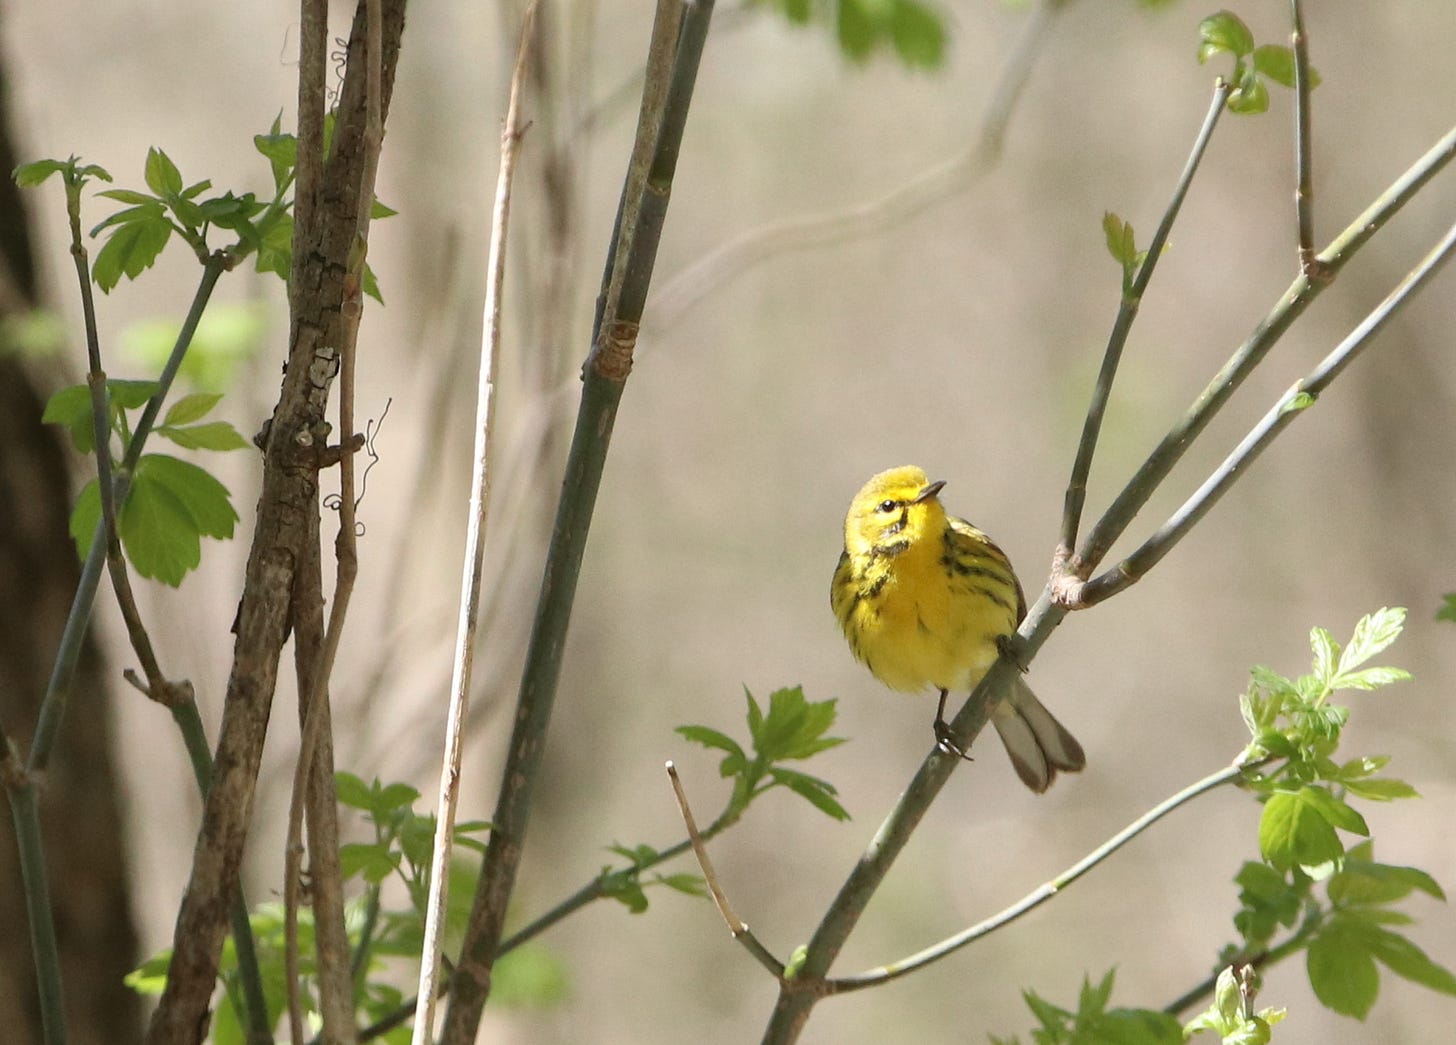 A small yellow bird with black stripes on its sides looks into the camera from its perch on a narrow branch.